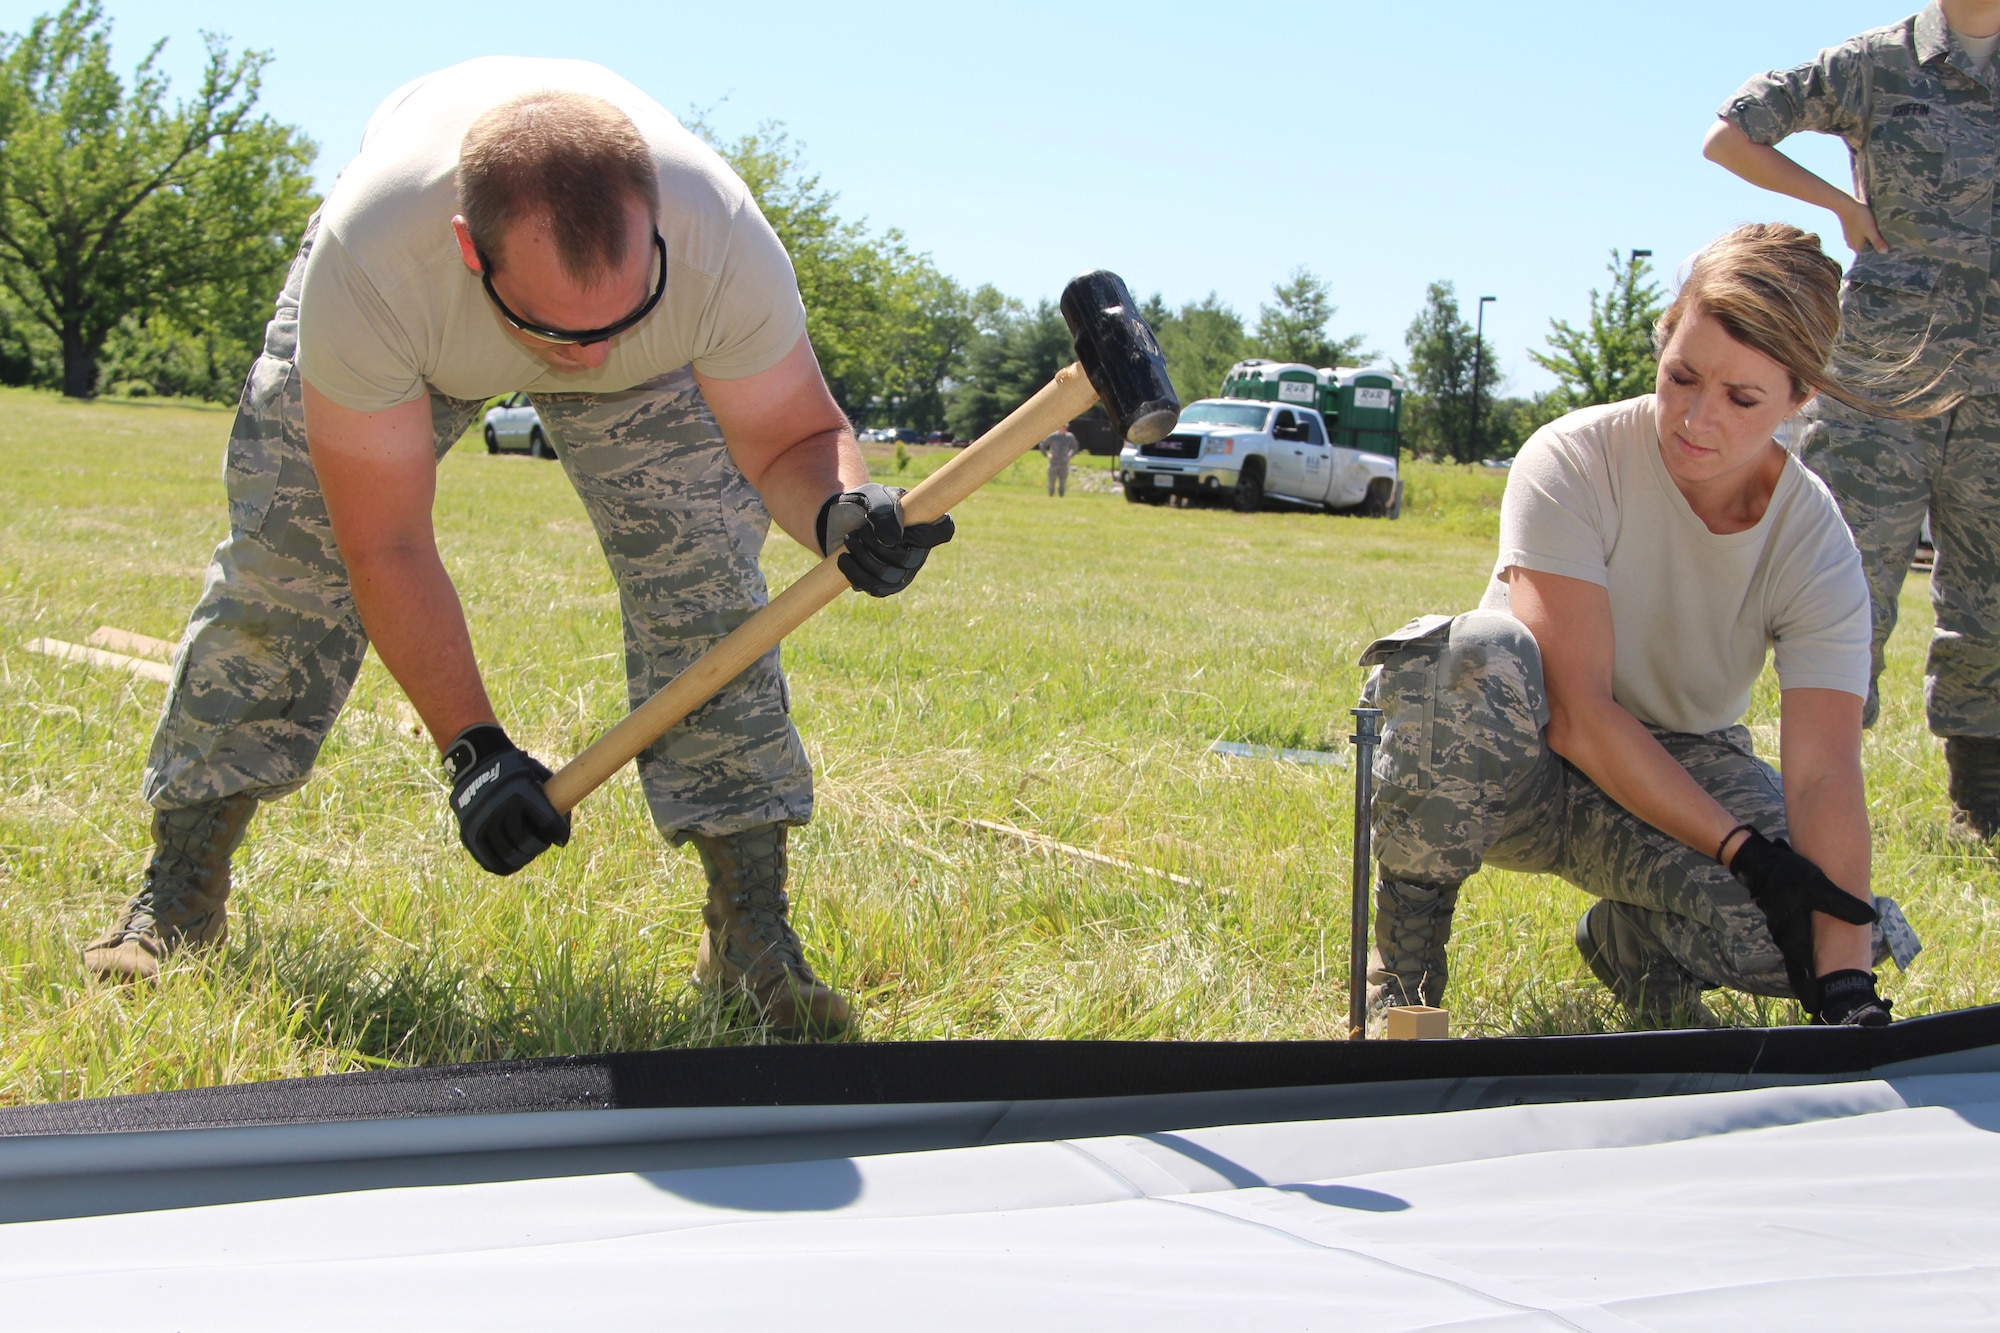 Staff Sgt. Brenton Darnell of 932nd Airlift Wing Medical group hammers down a stake for an Alaskan tent floor as Staff Sgt. Kristi Dimarco looks on.  Member of the 932nd AW Medical Group worked for several hours to get the tent up and ready to go in preparation for a training exercise this month. (U.S. Air Force Photo/Staff. Sgt. Meiko Schill)